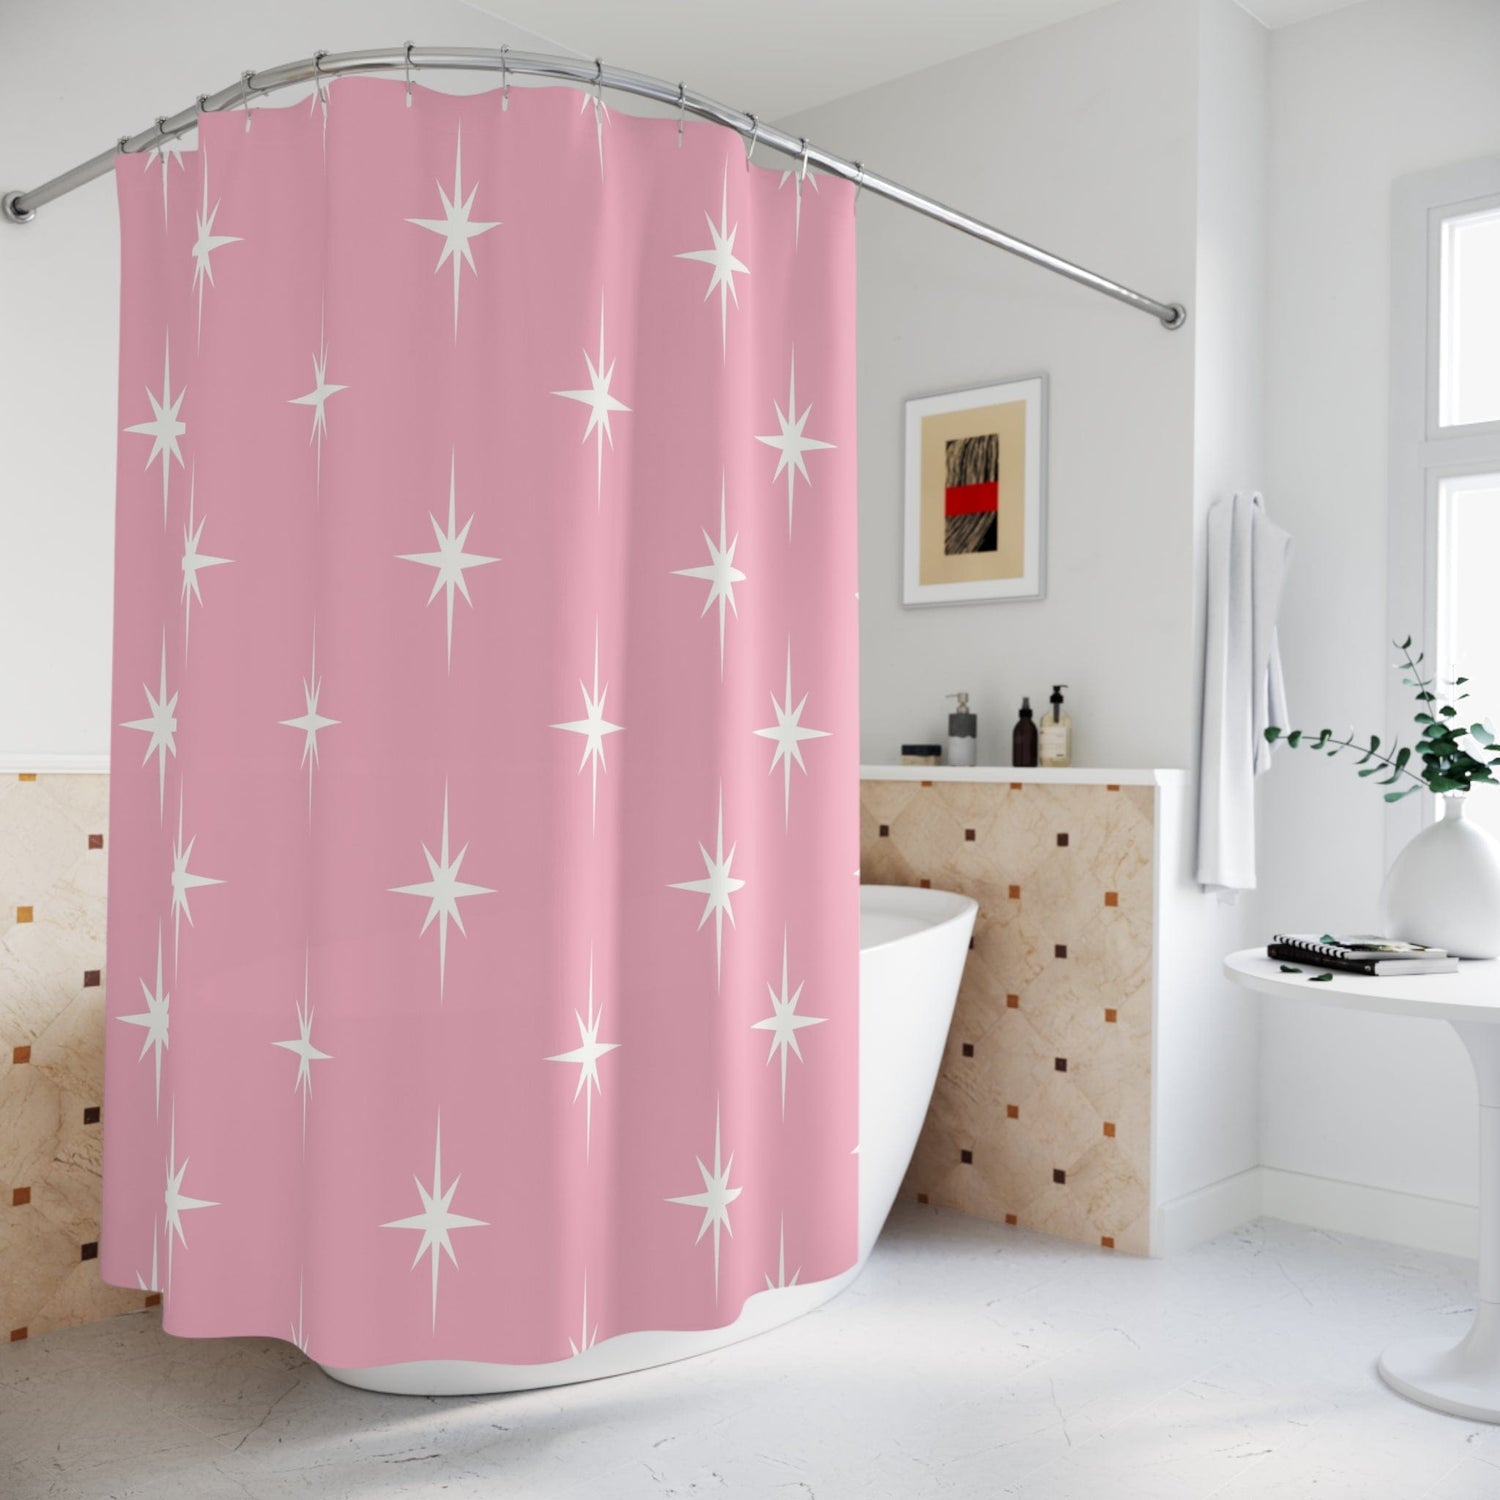 Kate McEnroe New York 50s Retro Mid Century Modern Atomic Starburst Shower Curtains in Vintage Pink and White Shower Curtains 70&quot; × 74&quot; S40-STB-PNK-7X7